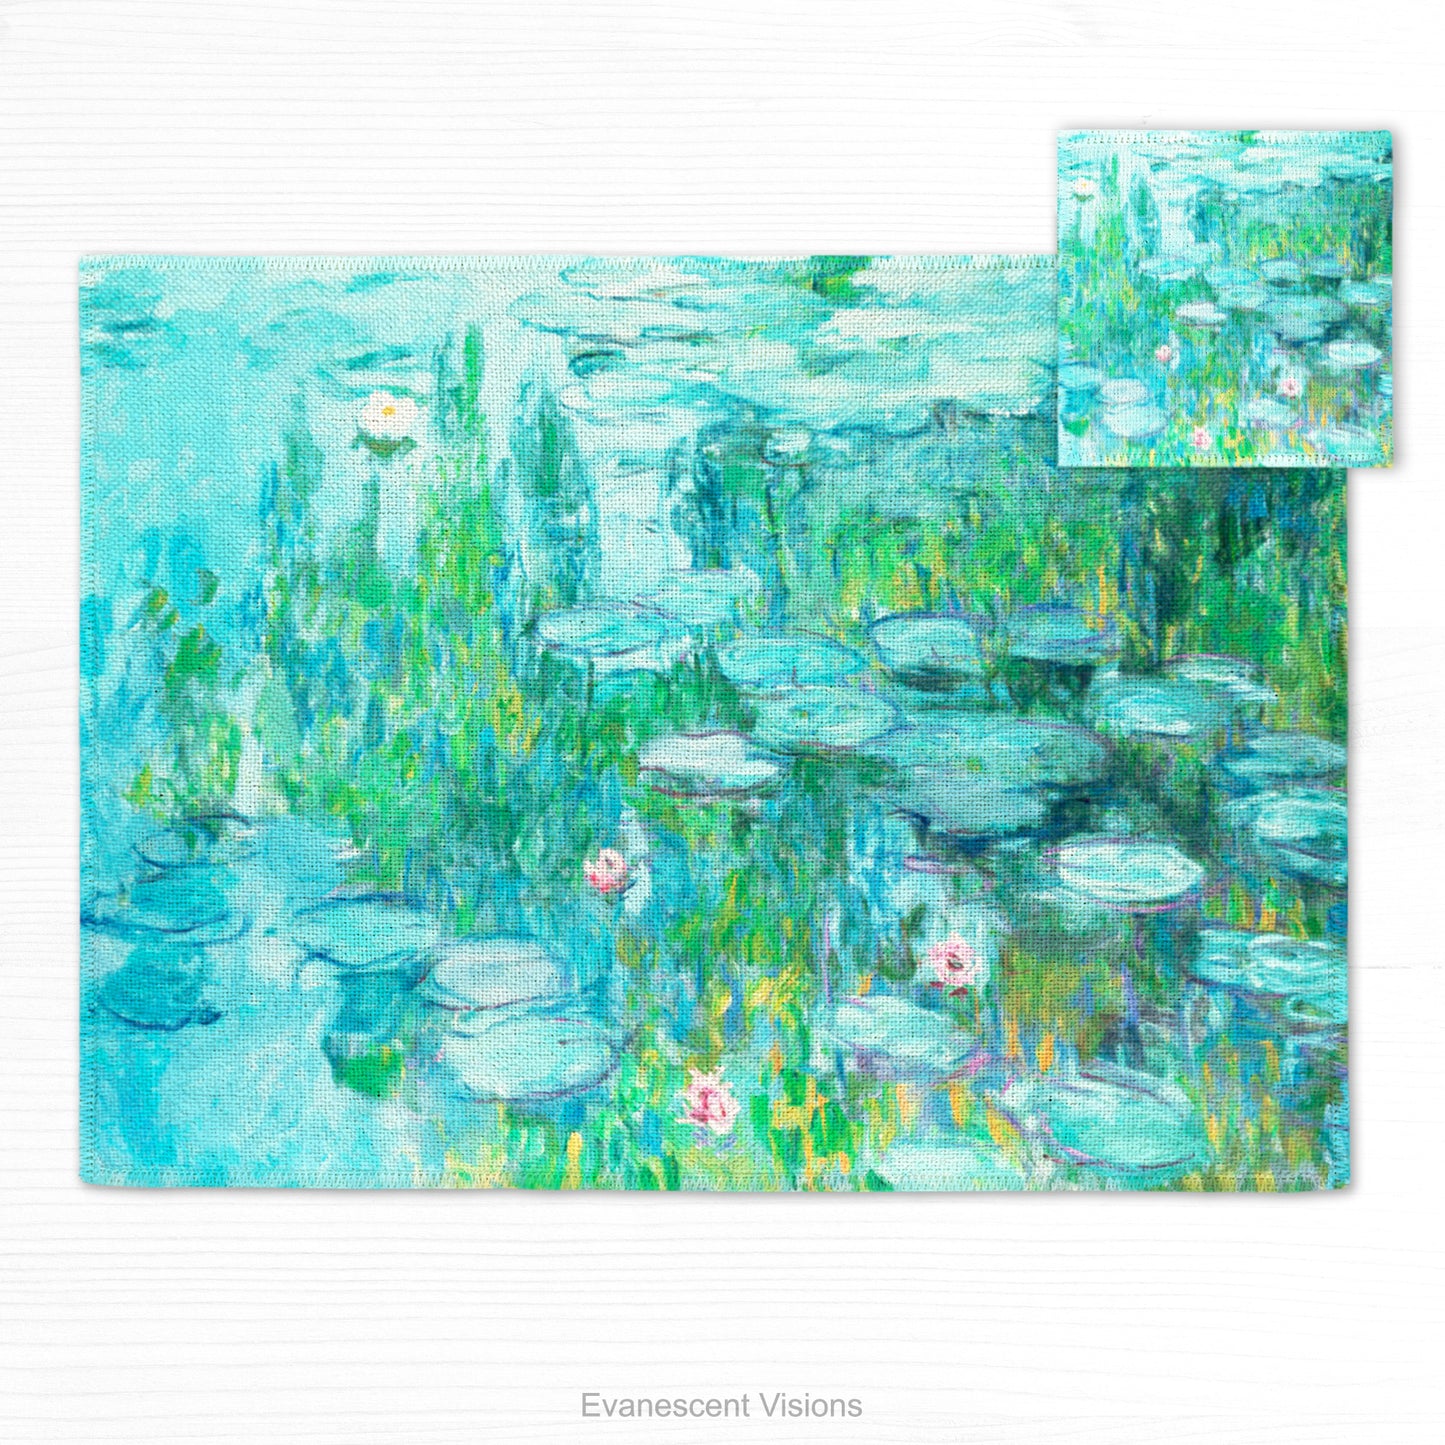 Placemat and coaster with design based on artwork, 'Water Lilies' circa 1915 by Claude Monet 